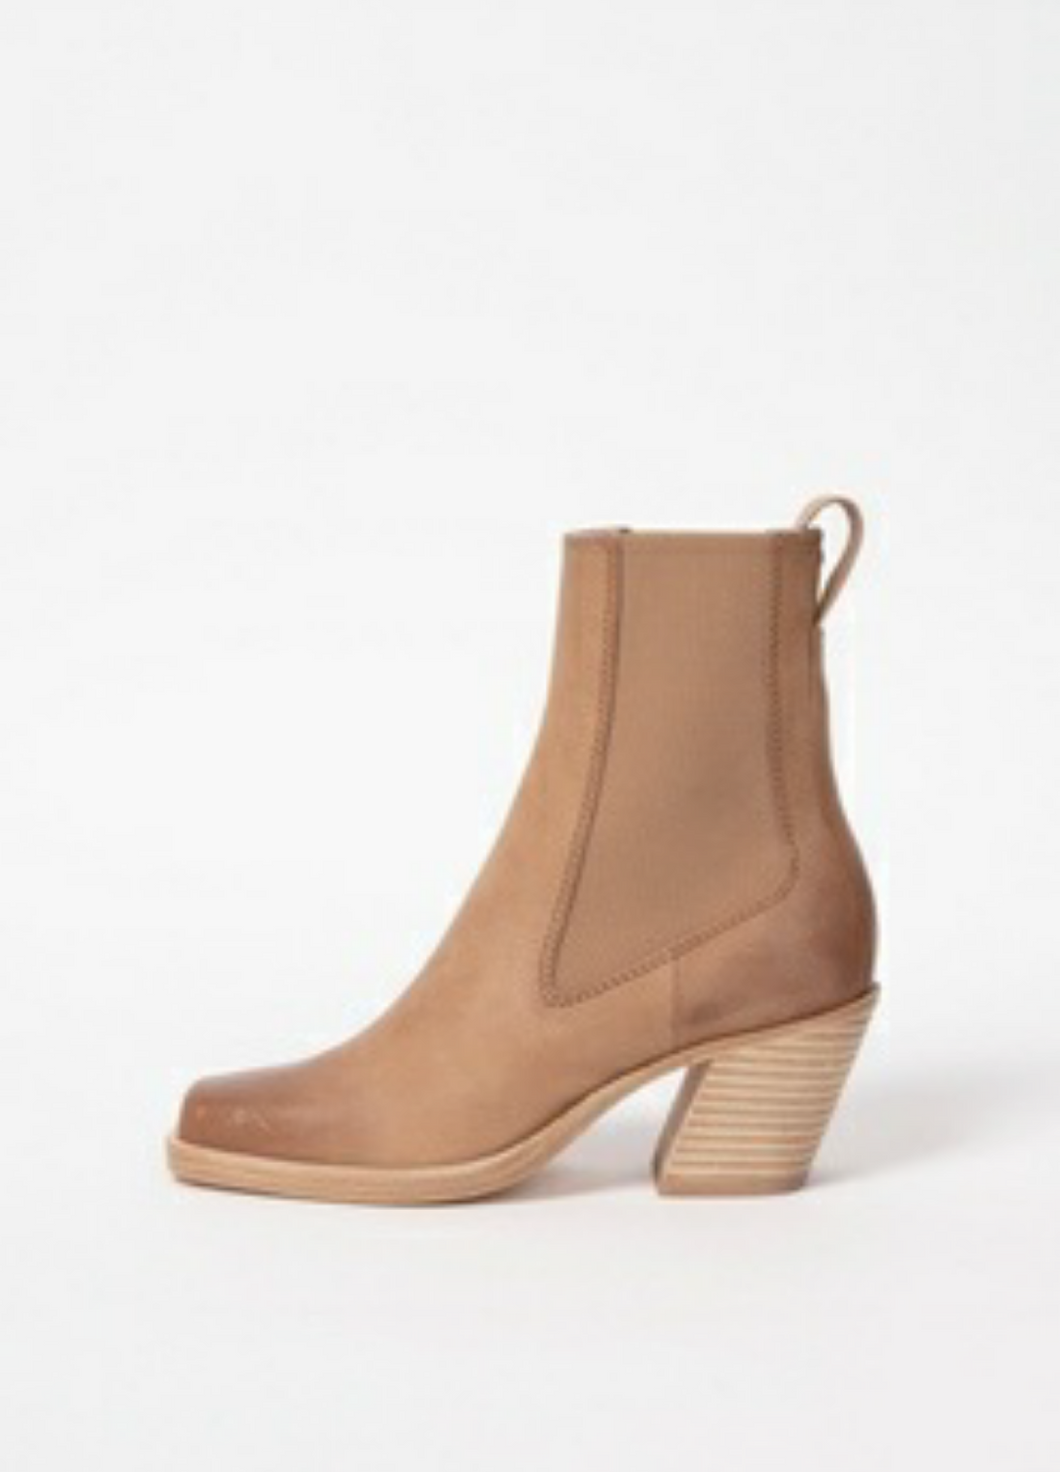 Axis Boot in Camel Leather